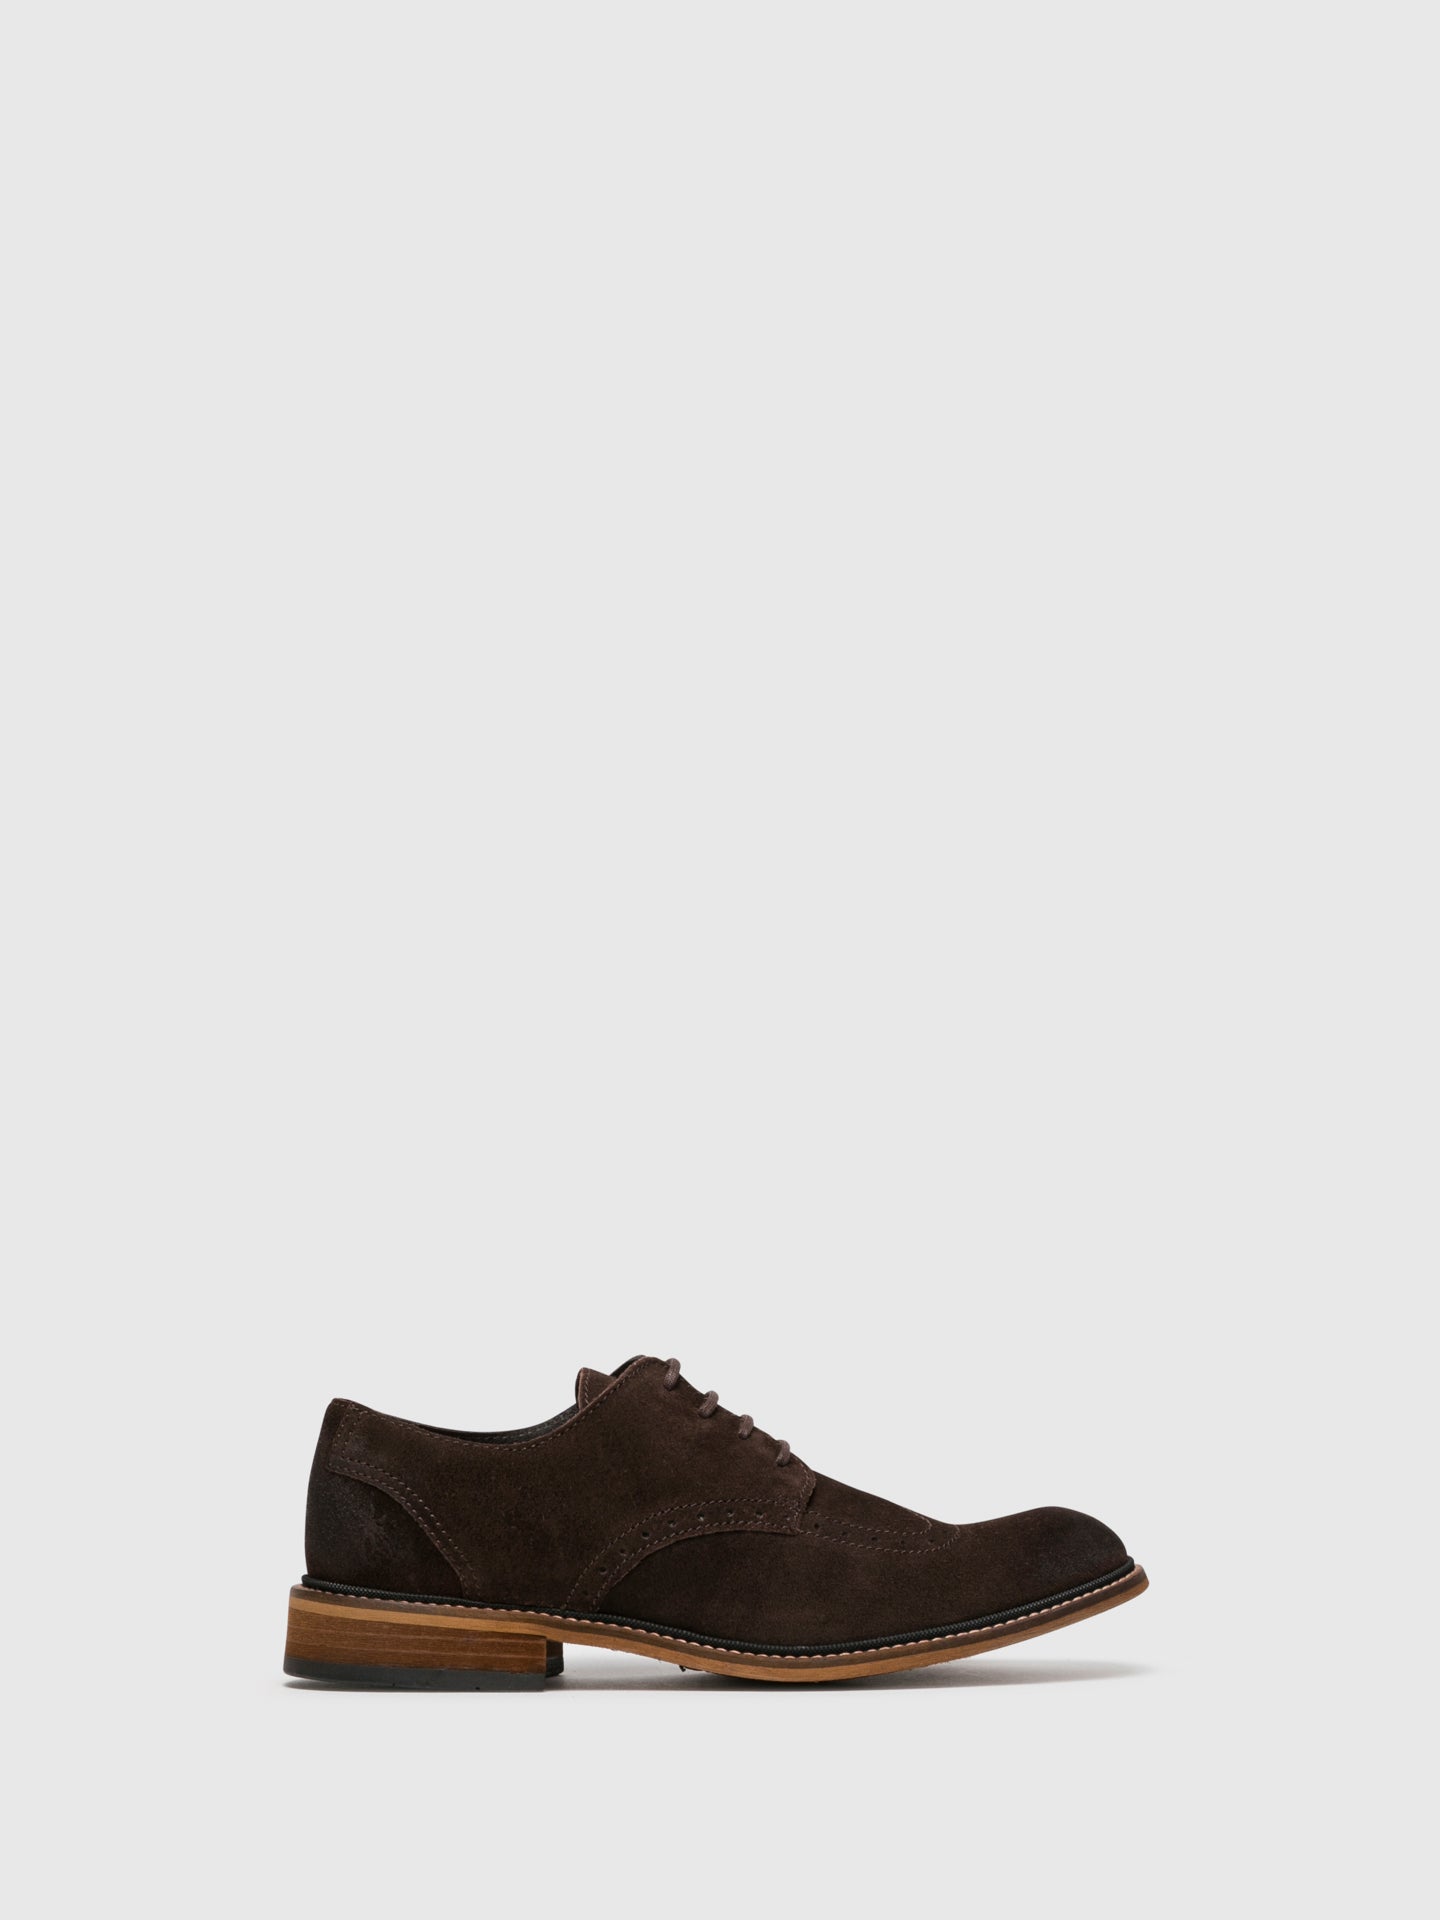 Fly London SaddleBrown Derby Shoes